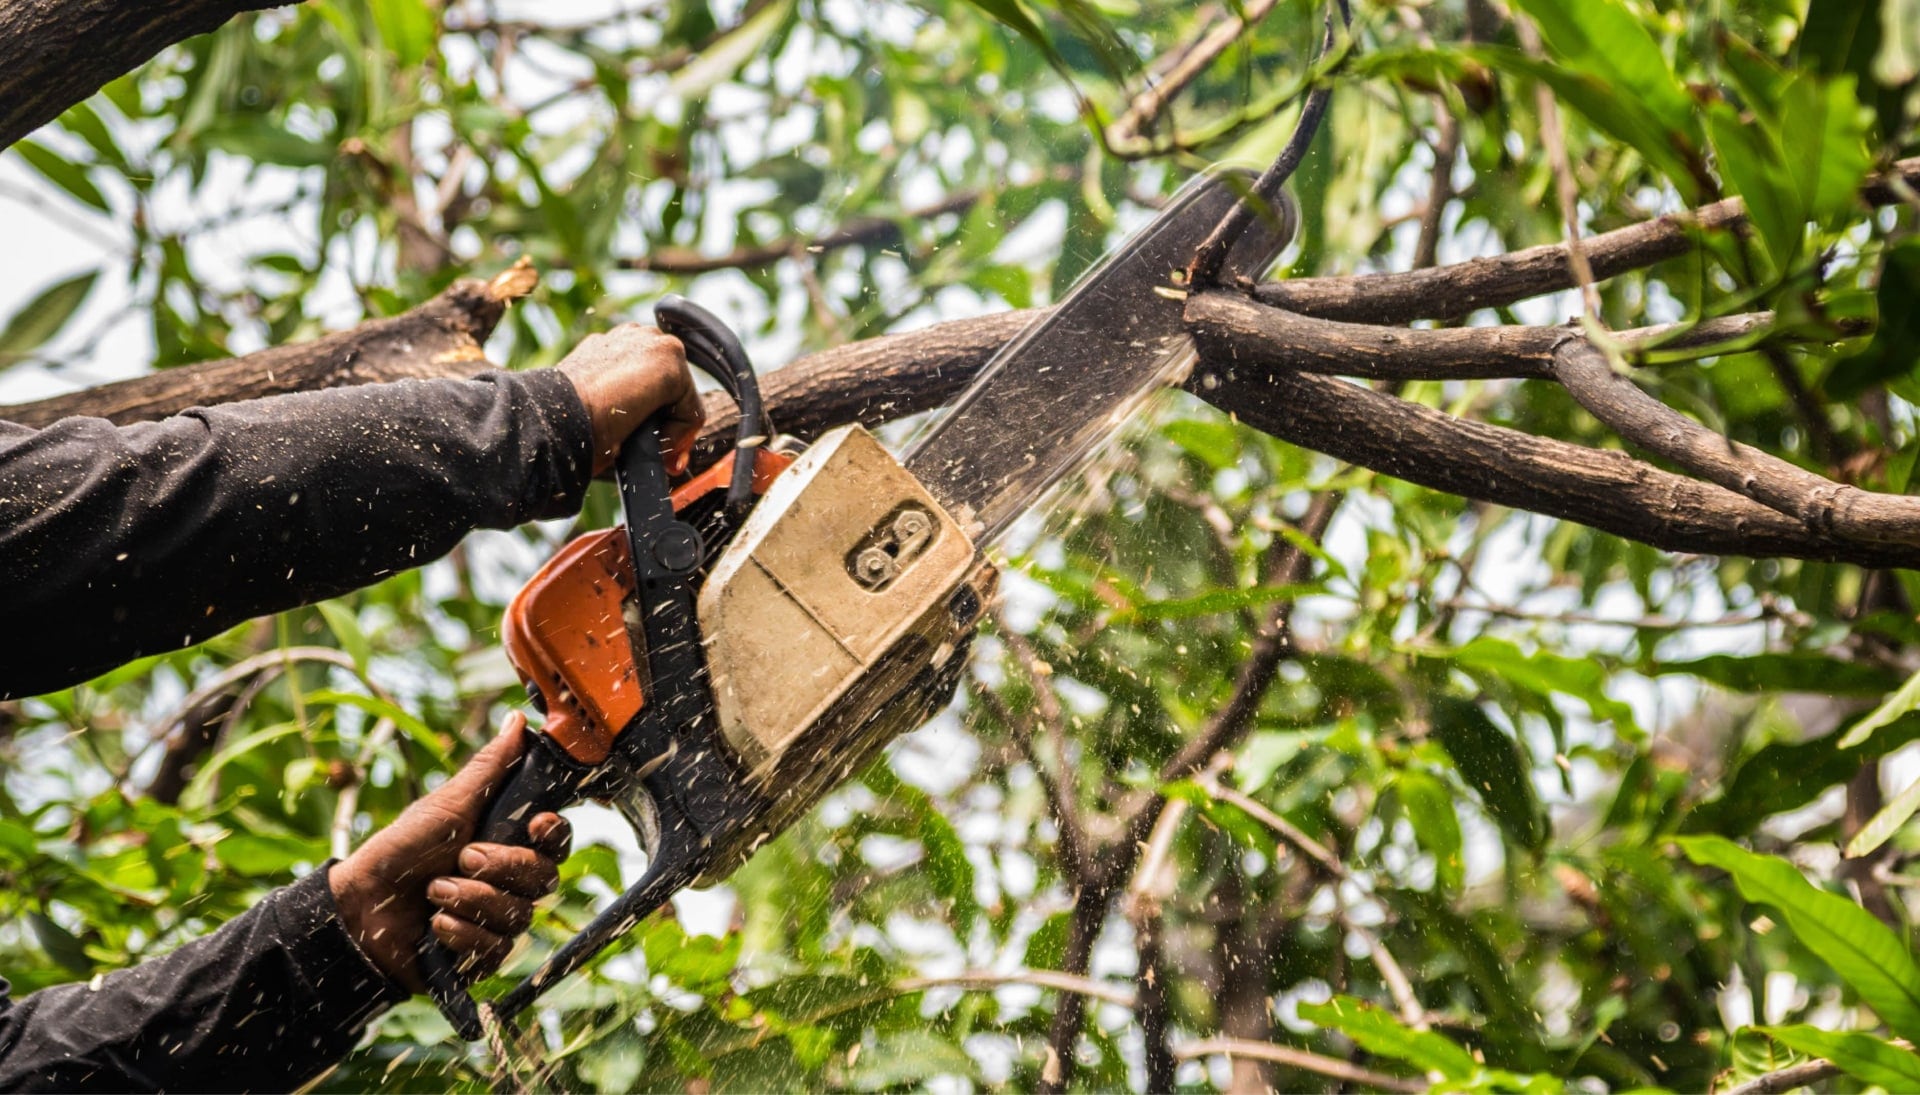 Expert Tree trimming services in Santa Ana